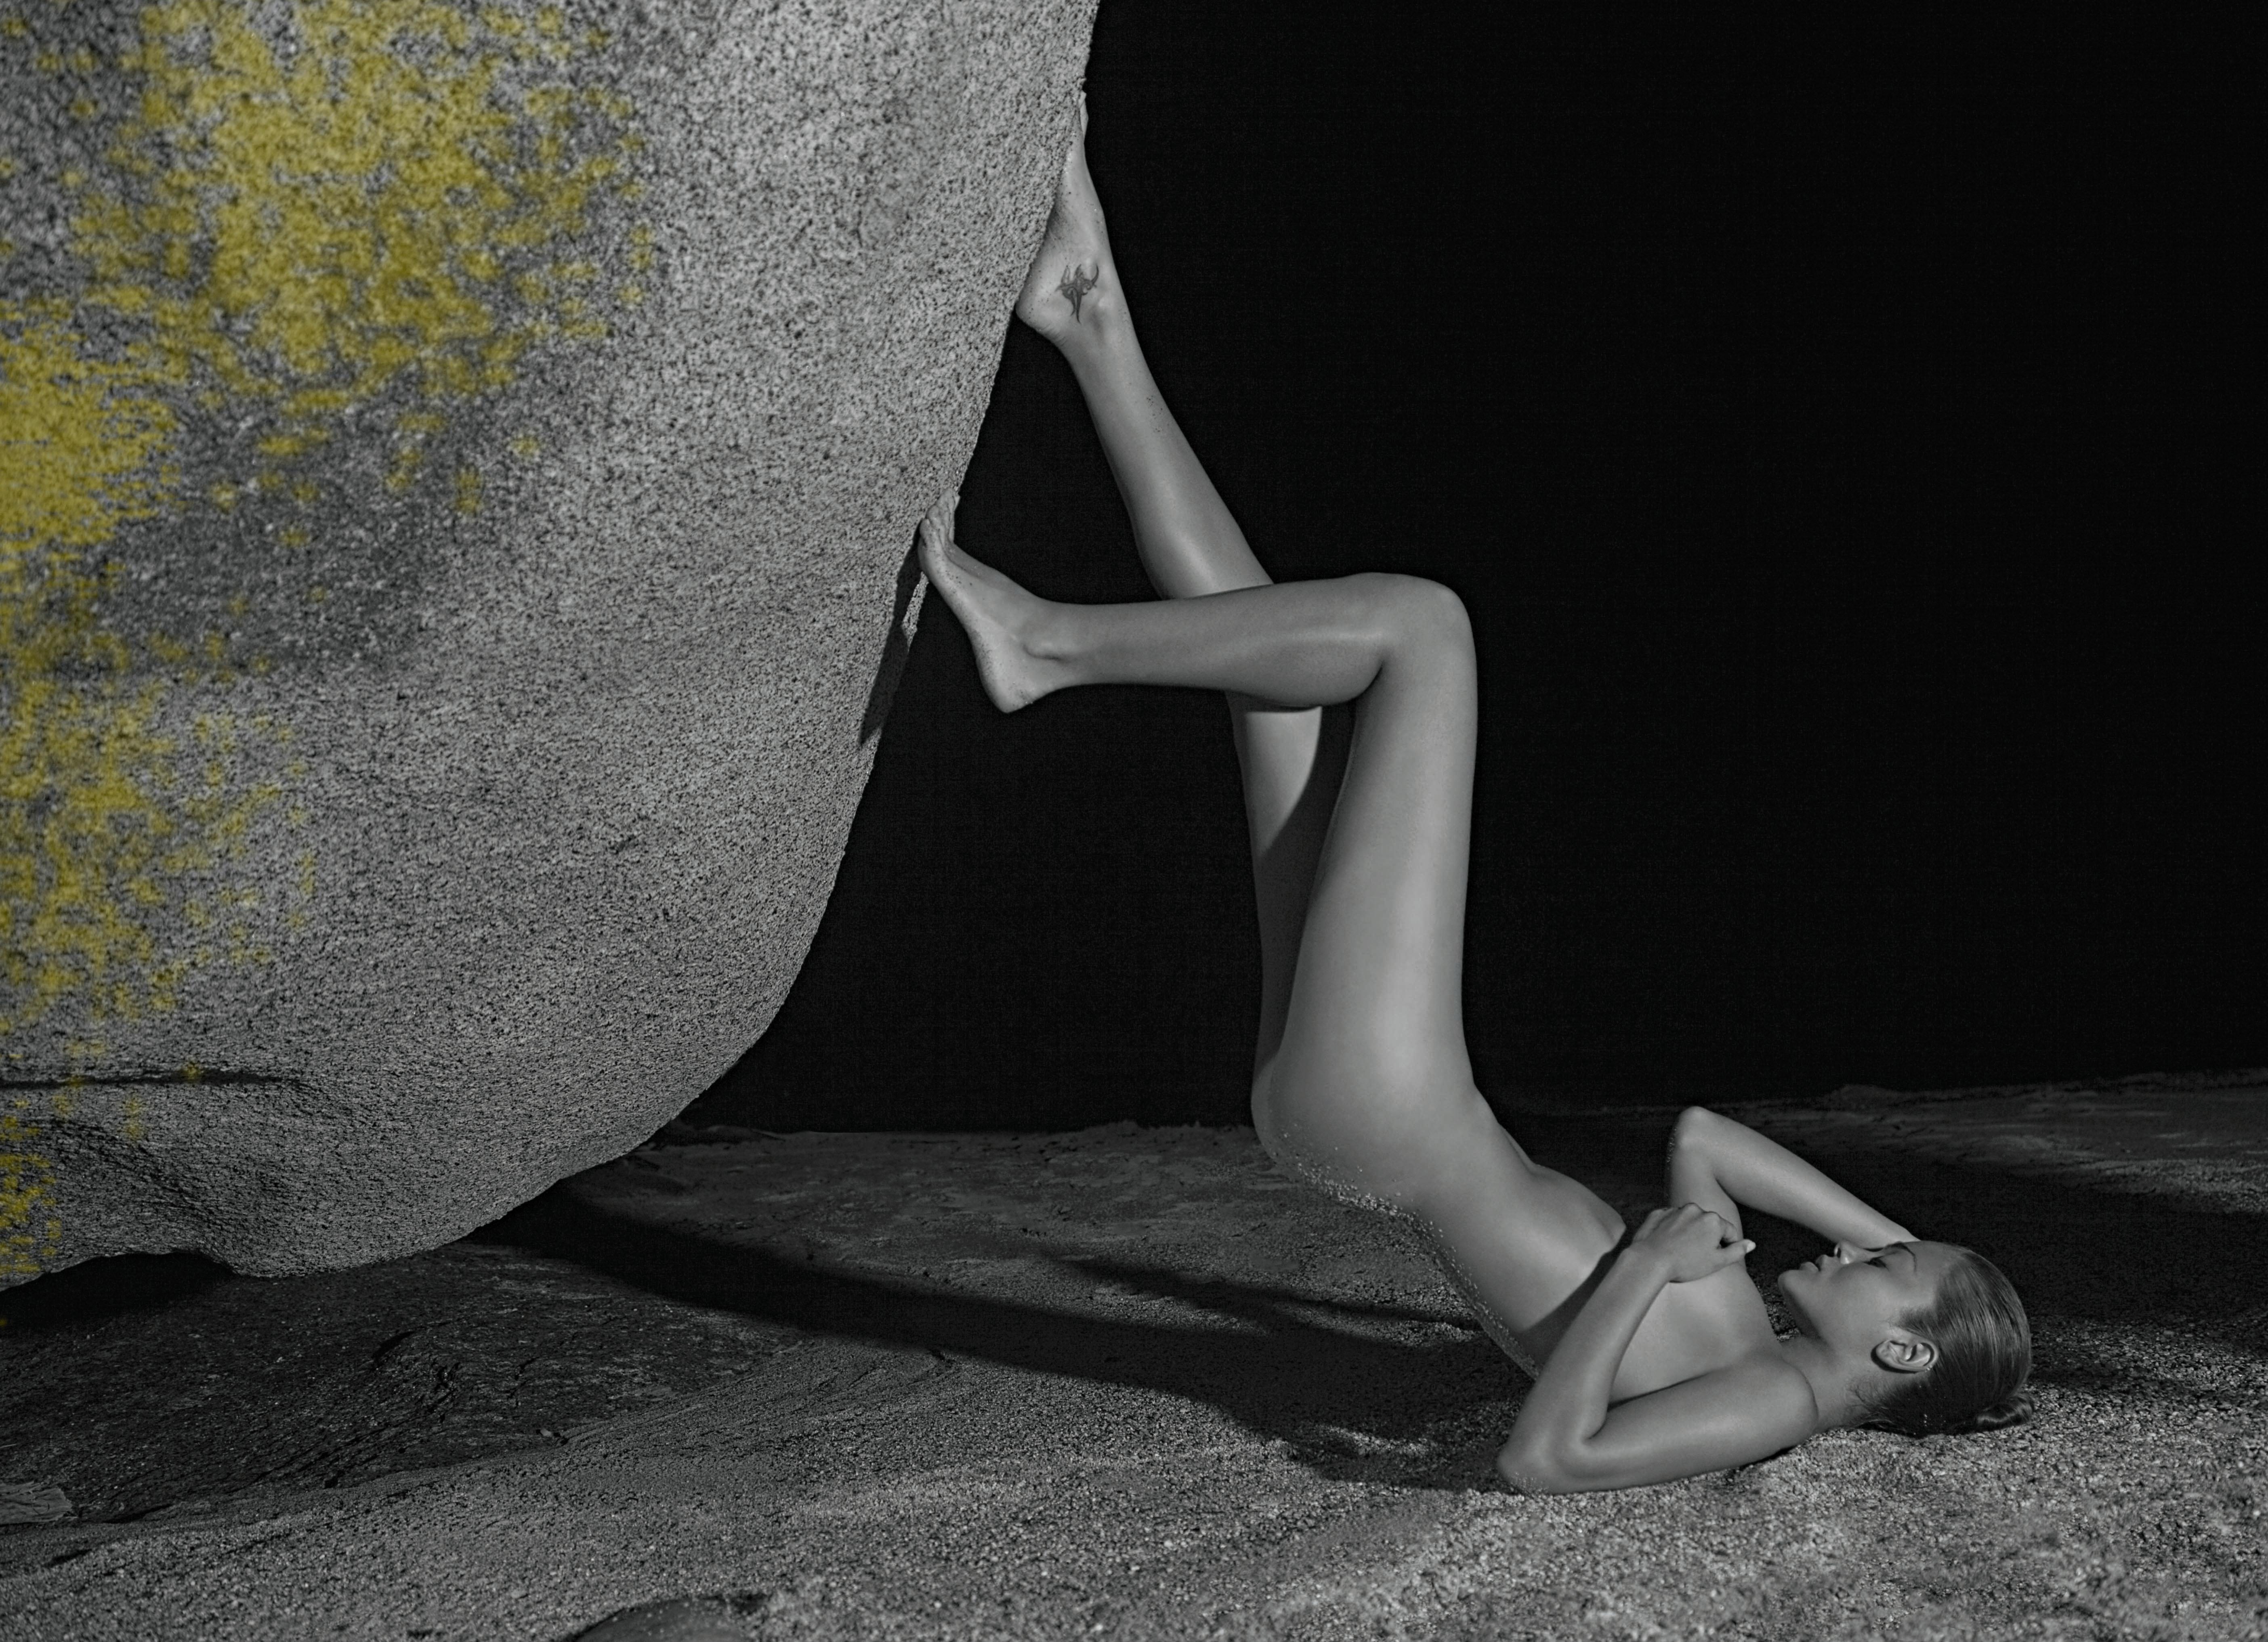 Half Angels Half Demons #18, Nude in a landscape. B&W and color photograph